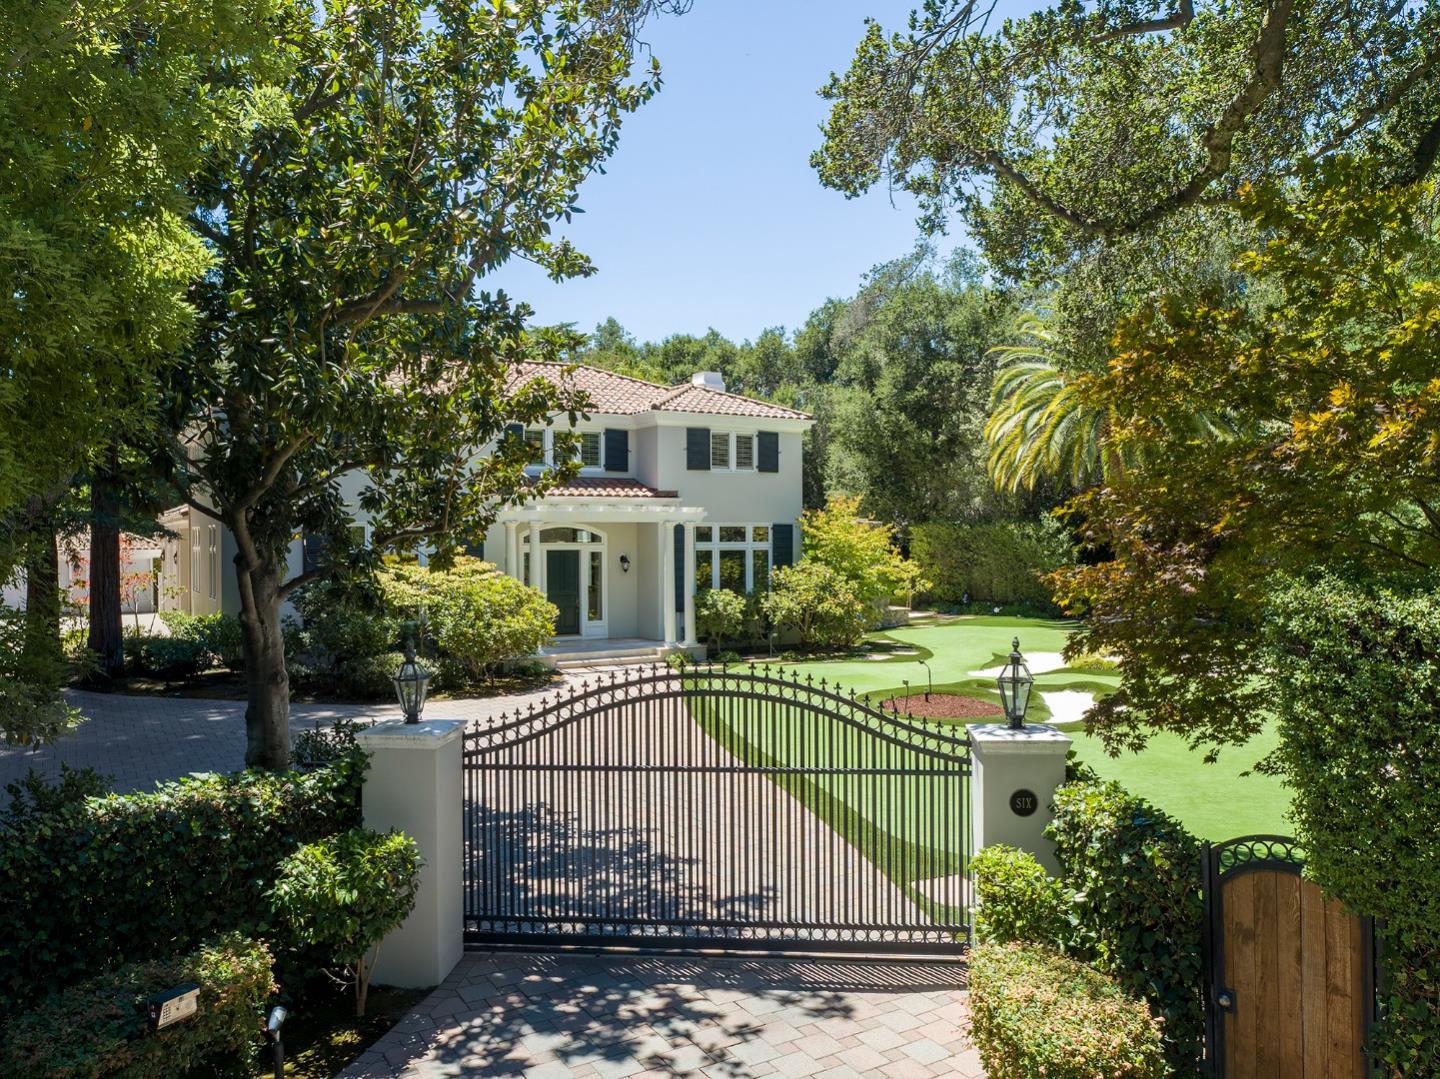 Gated on the edge of the Menlo Circus Club area with timeless architecture, beautifully appointed interiors, and exceptional grounds. Two levels with elegant formal rooms, dedicated office, and extra-large kitchen and family room combo. 5 bedrooms, each with en suite bath, including one on the main level plus upstairs primary suite with sumptuous bath with heated floors and private office or fitness center. Exceptional grounds for fitness, recreation, and entertaining with solar-heated pool and spa, 9-hole putting green with bunkers, batting cage, sport court, plus fireplace and barbecue terraces, all in a very private setting dotted with many fruit trees. Excellent Menlo Park schools.